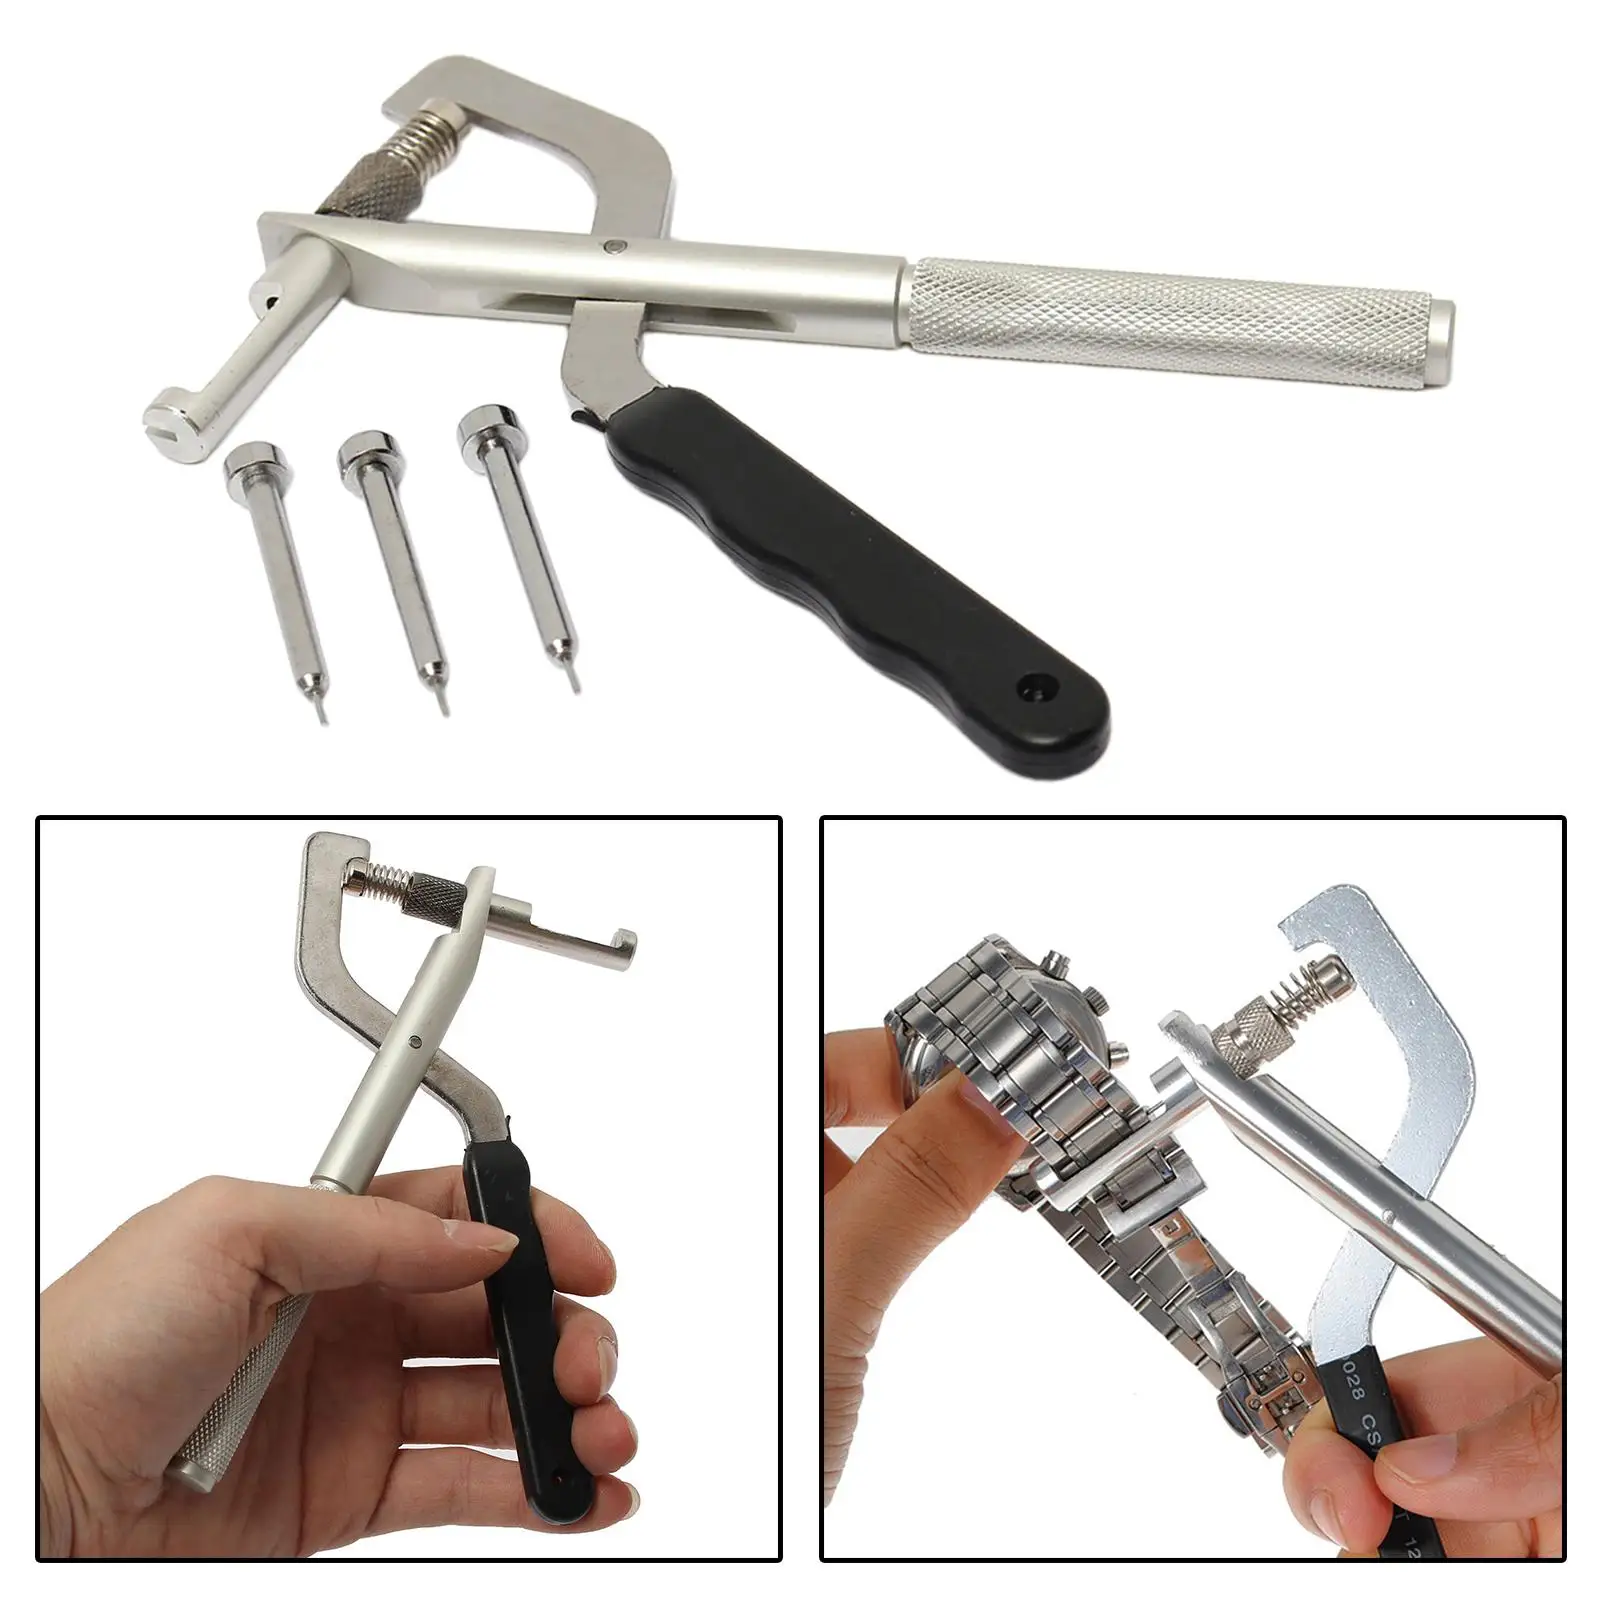 Wrist Pins Remover Spring Bar Plier Puncher Repair Tools